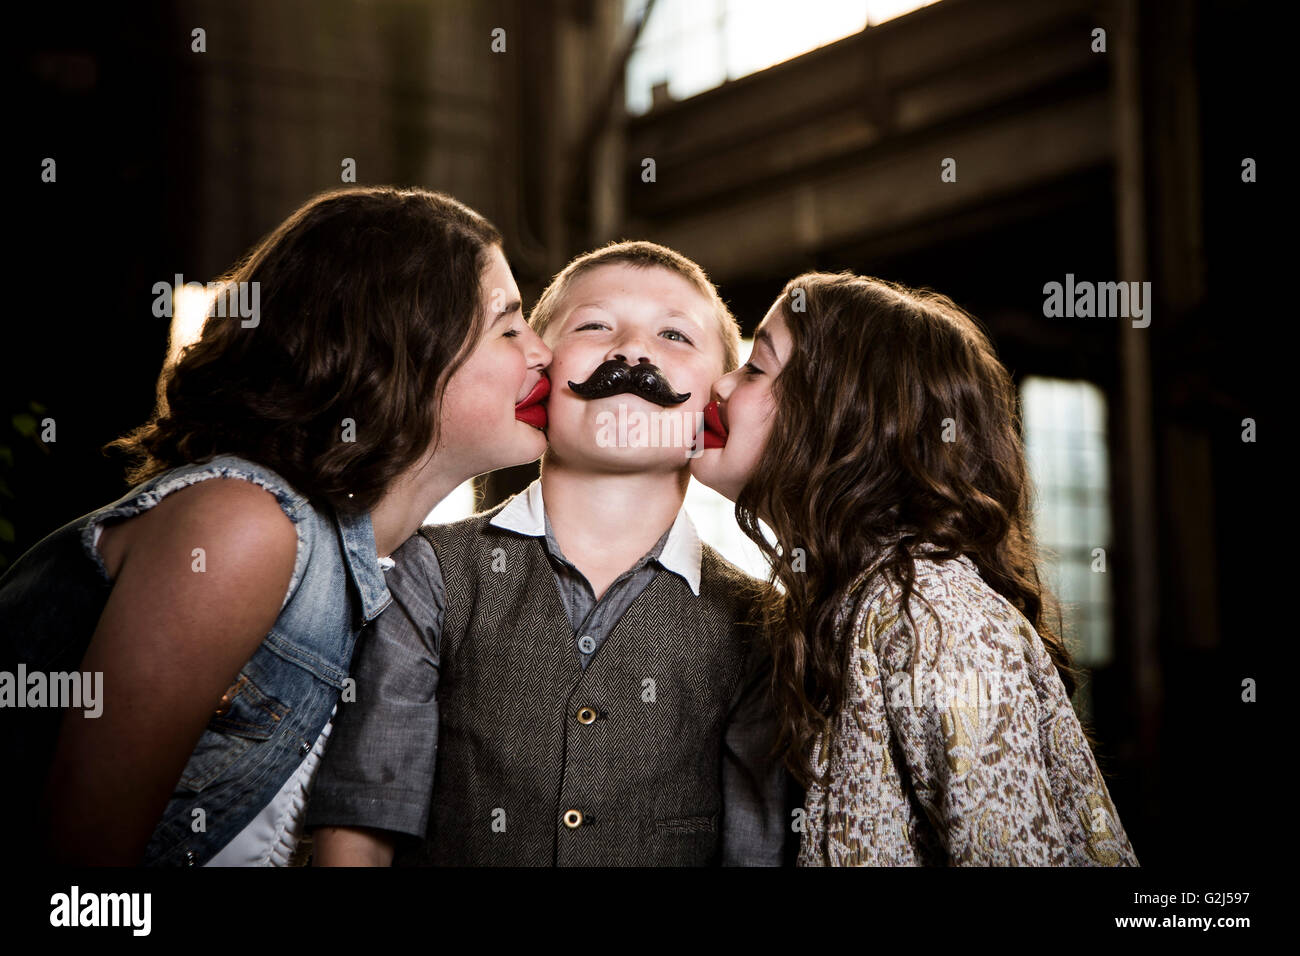 Two Girls Kissing Boy with Wax Lips in Abandoned Warehouse Stock Photo